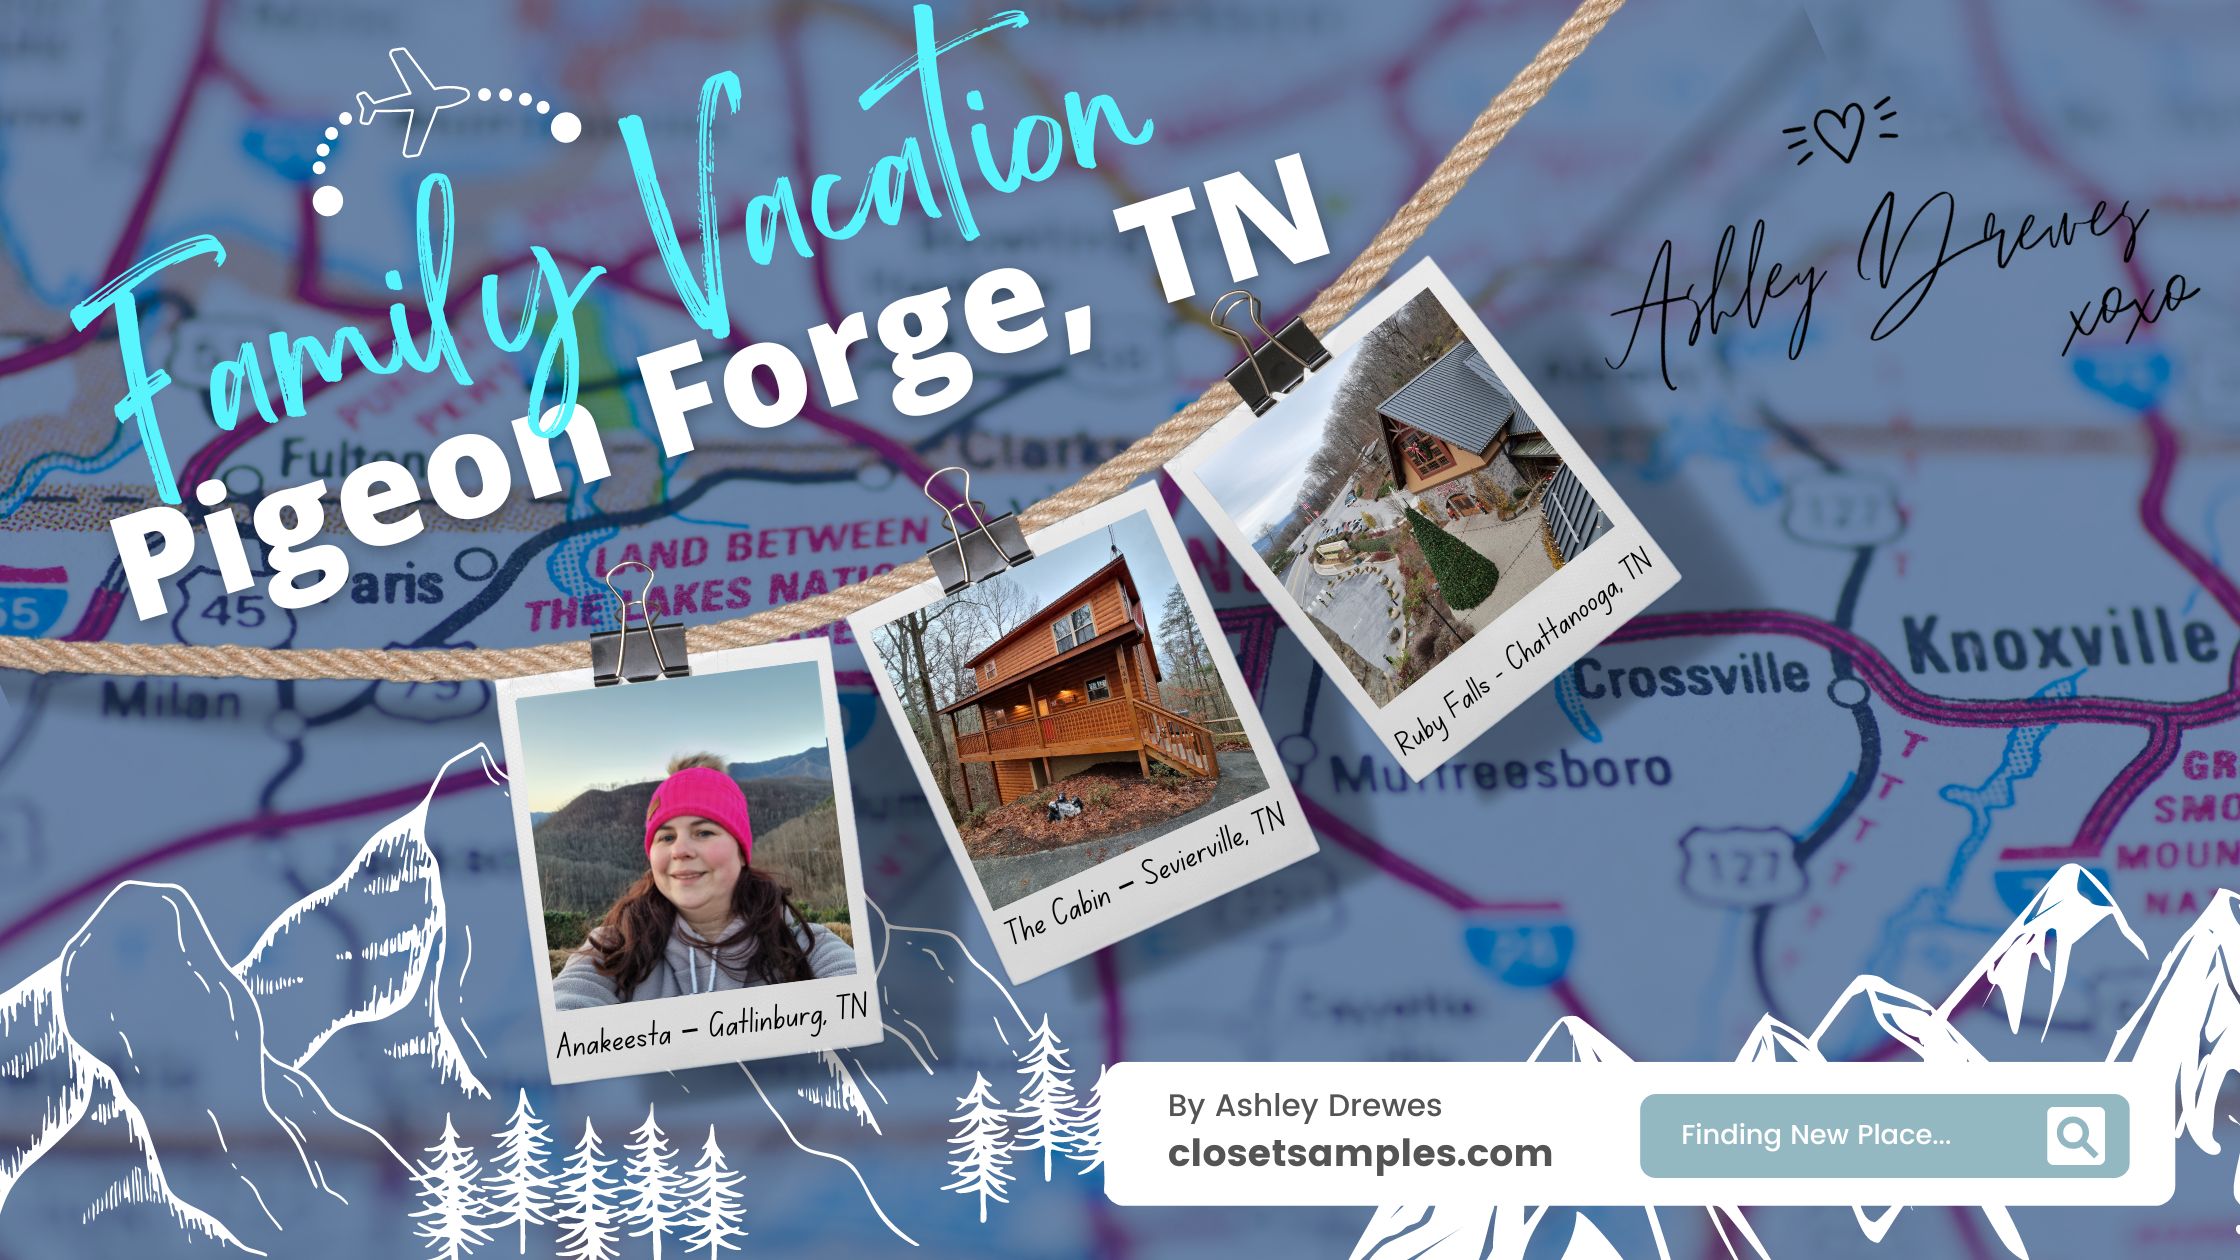 Our 2022 Family Vacation to Pigeon Forge Tennessee closetsamples